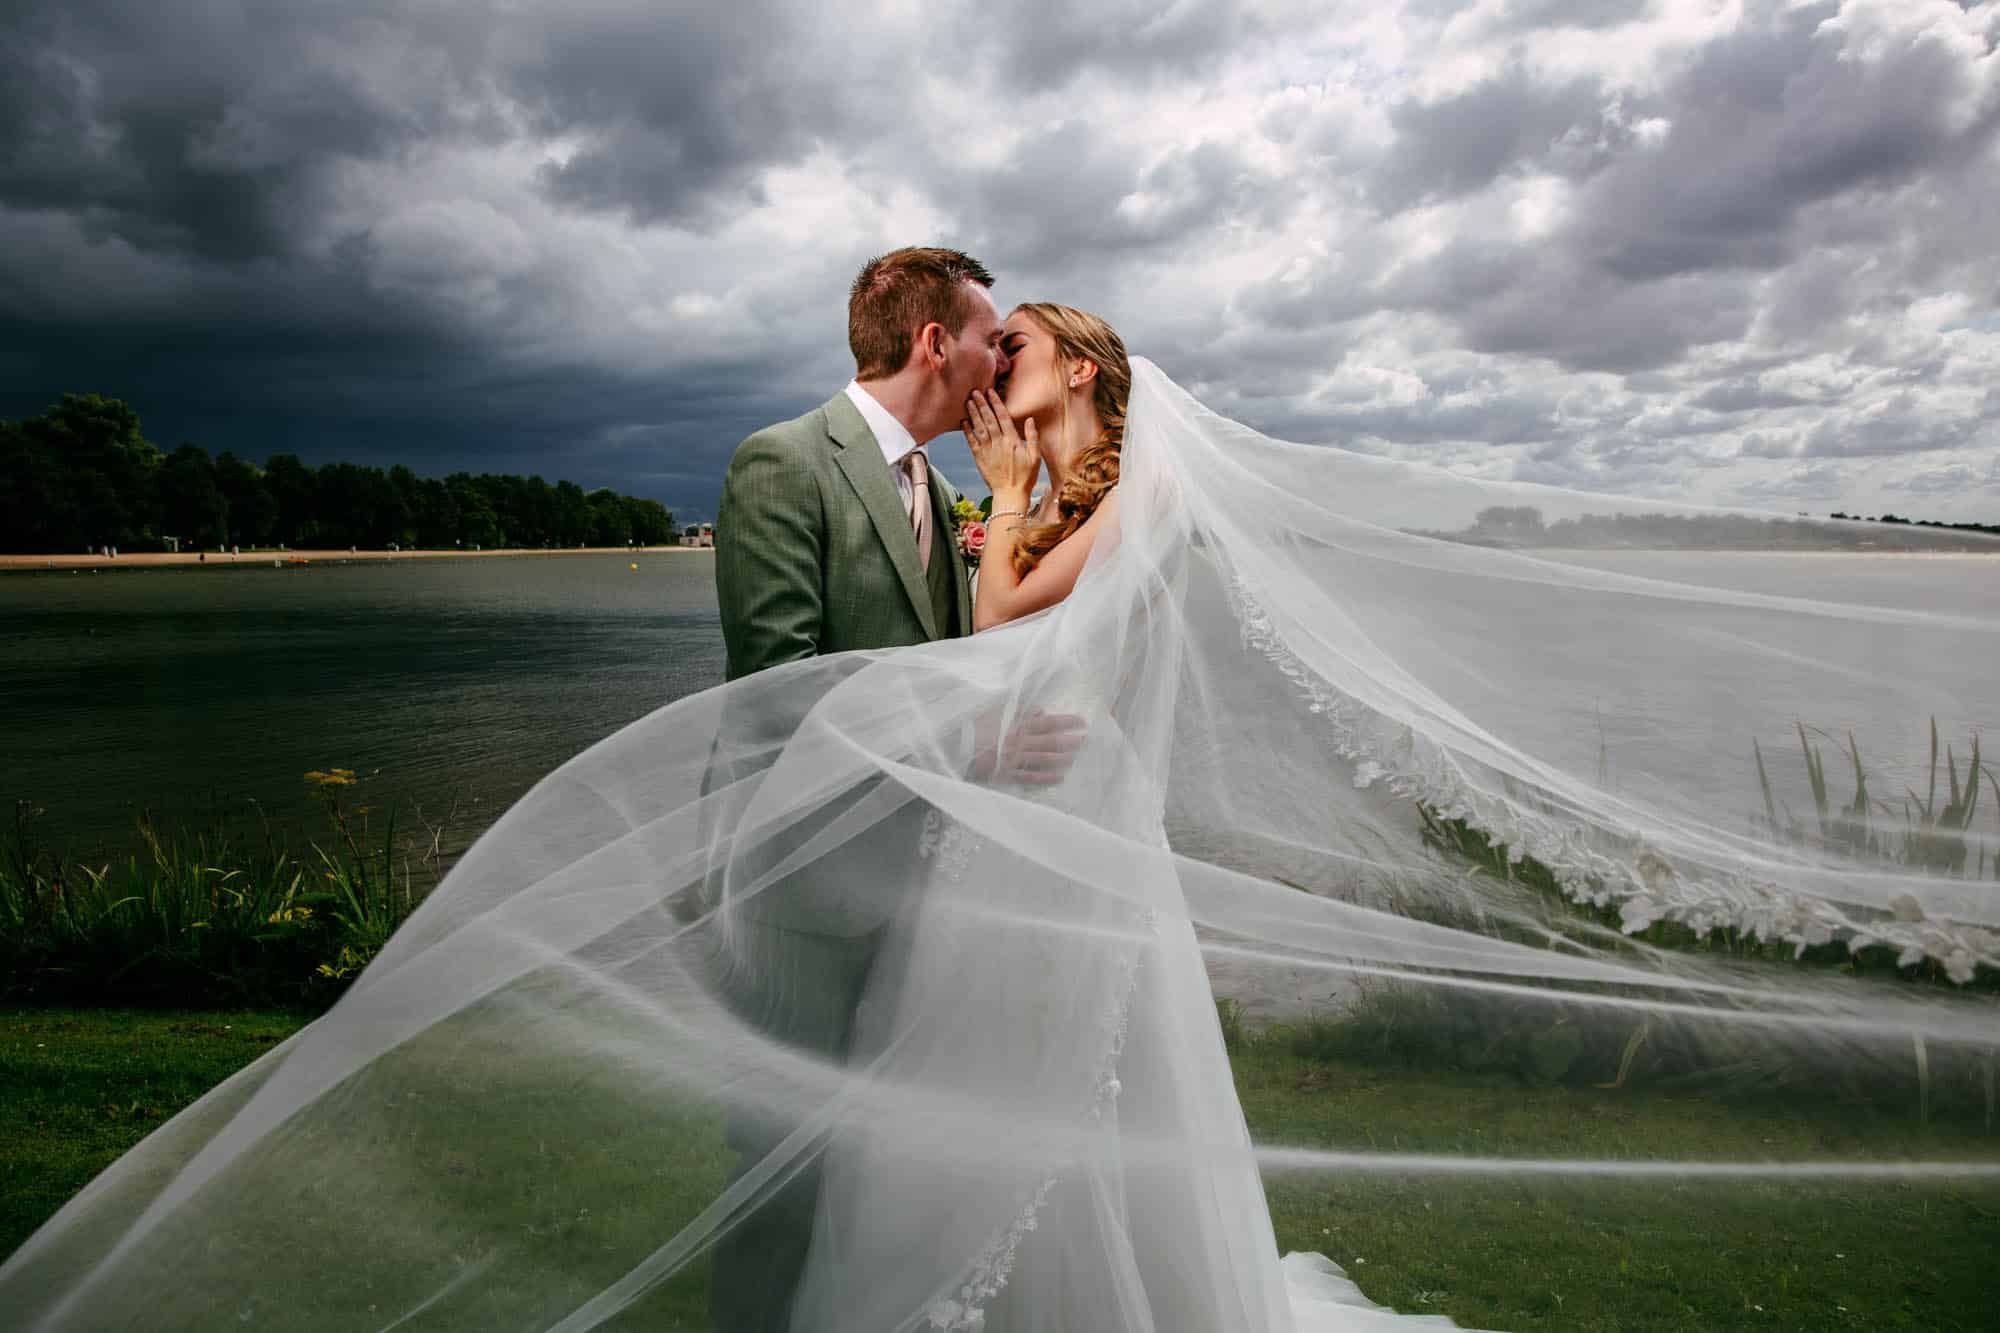 A bride and groom share a passionate kiss under a stormy sky on their wedding day and embrace the enchanting atmosphere of rain at your wedding.